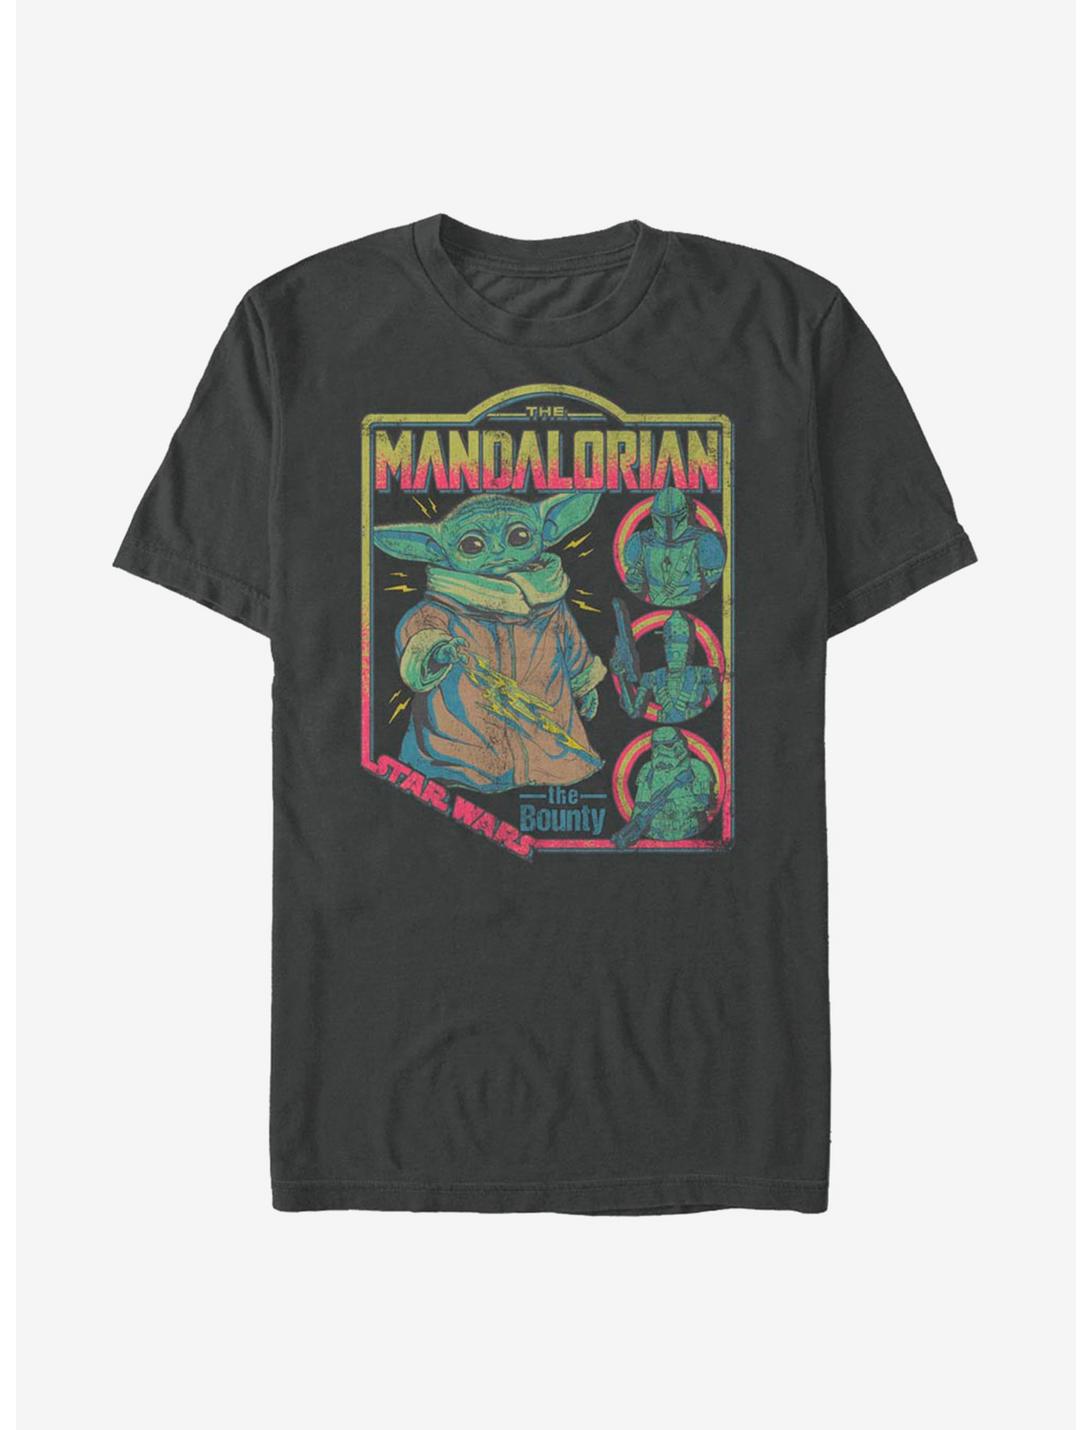 Star Wars The Mandalorian The Child Bounty Poster T-Shirt, CHARCOAL, hi-res